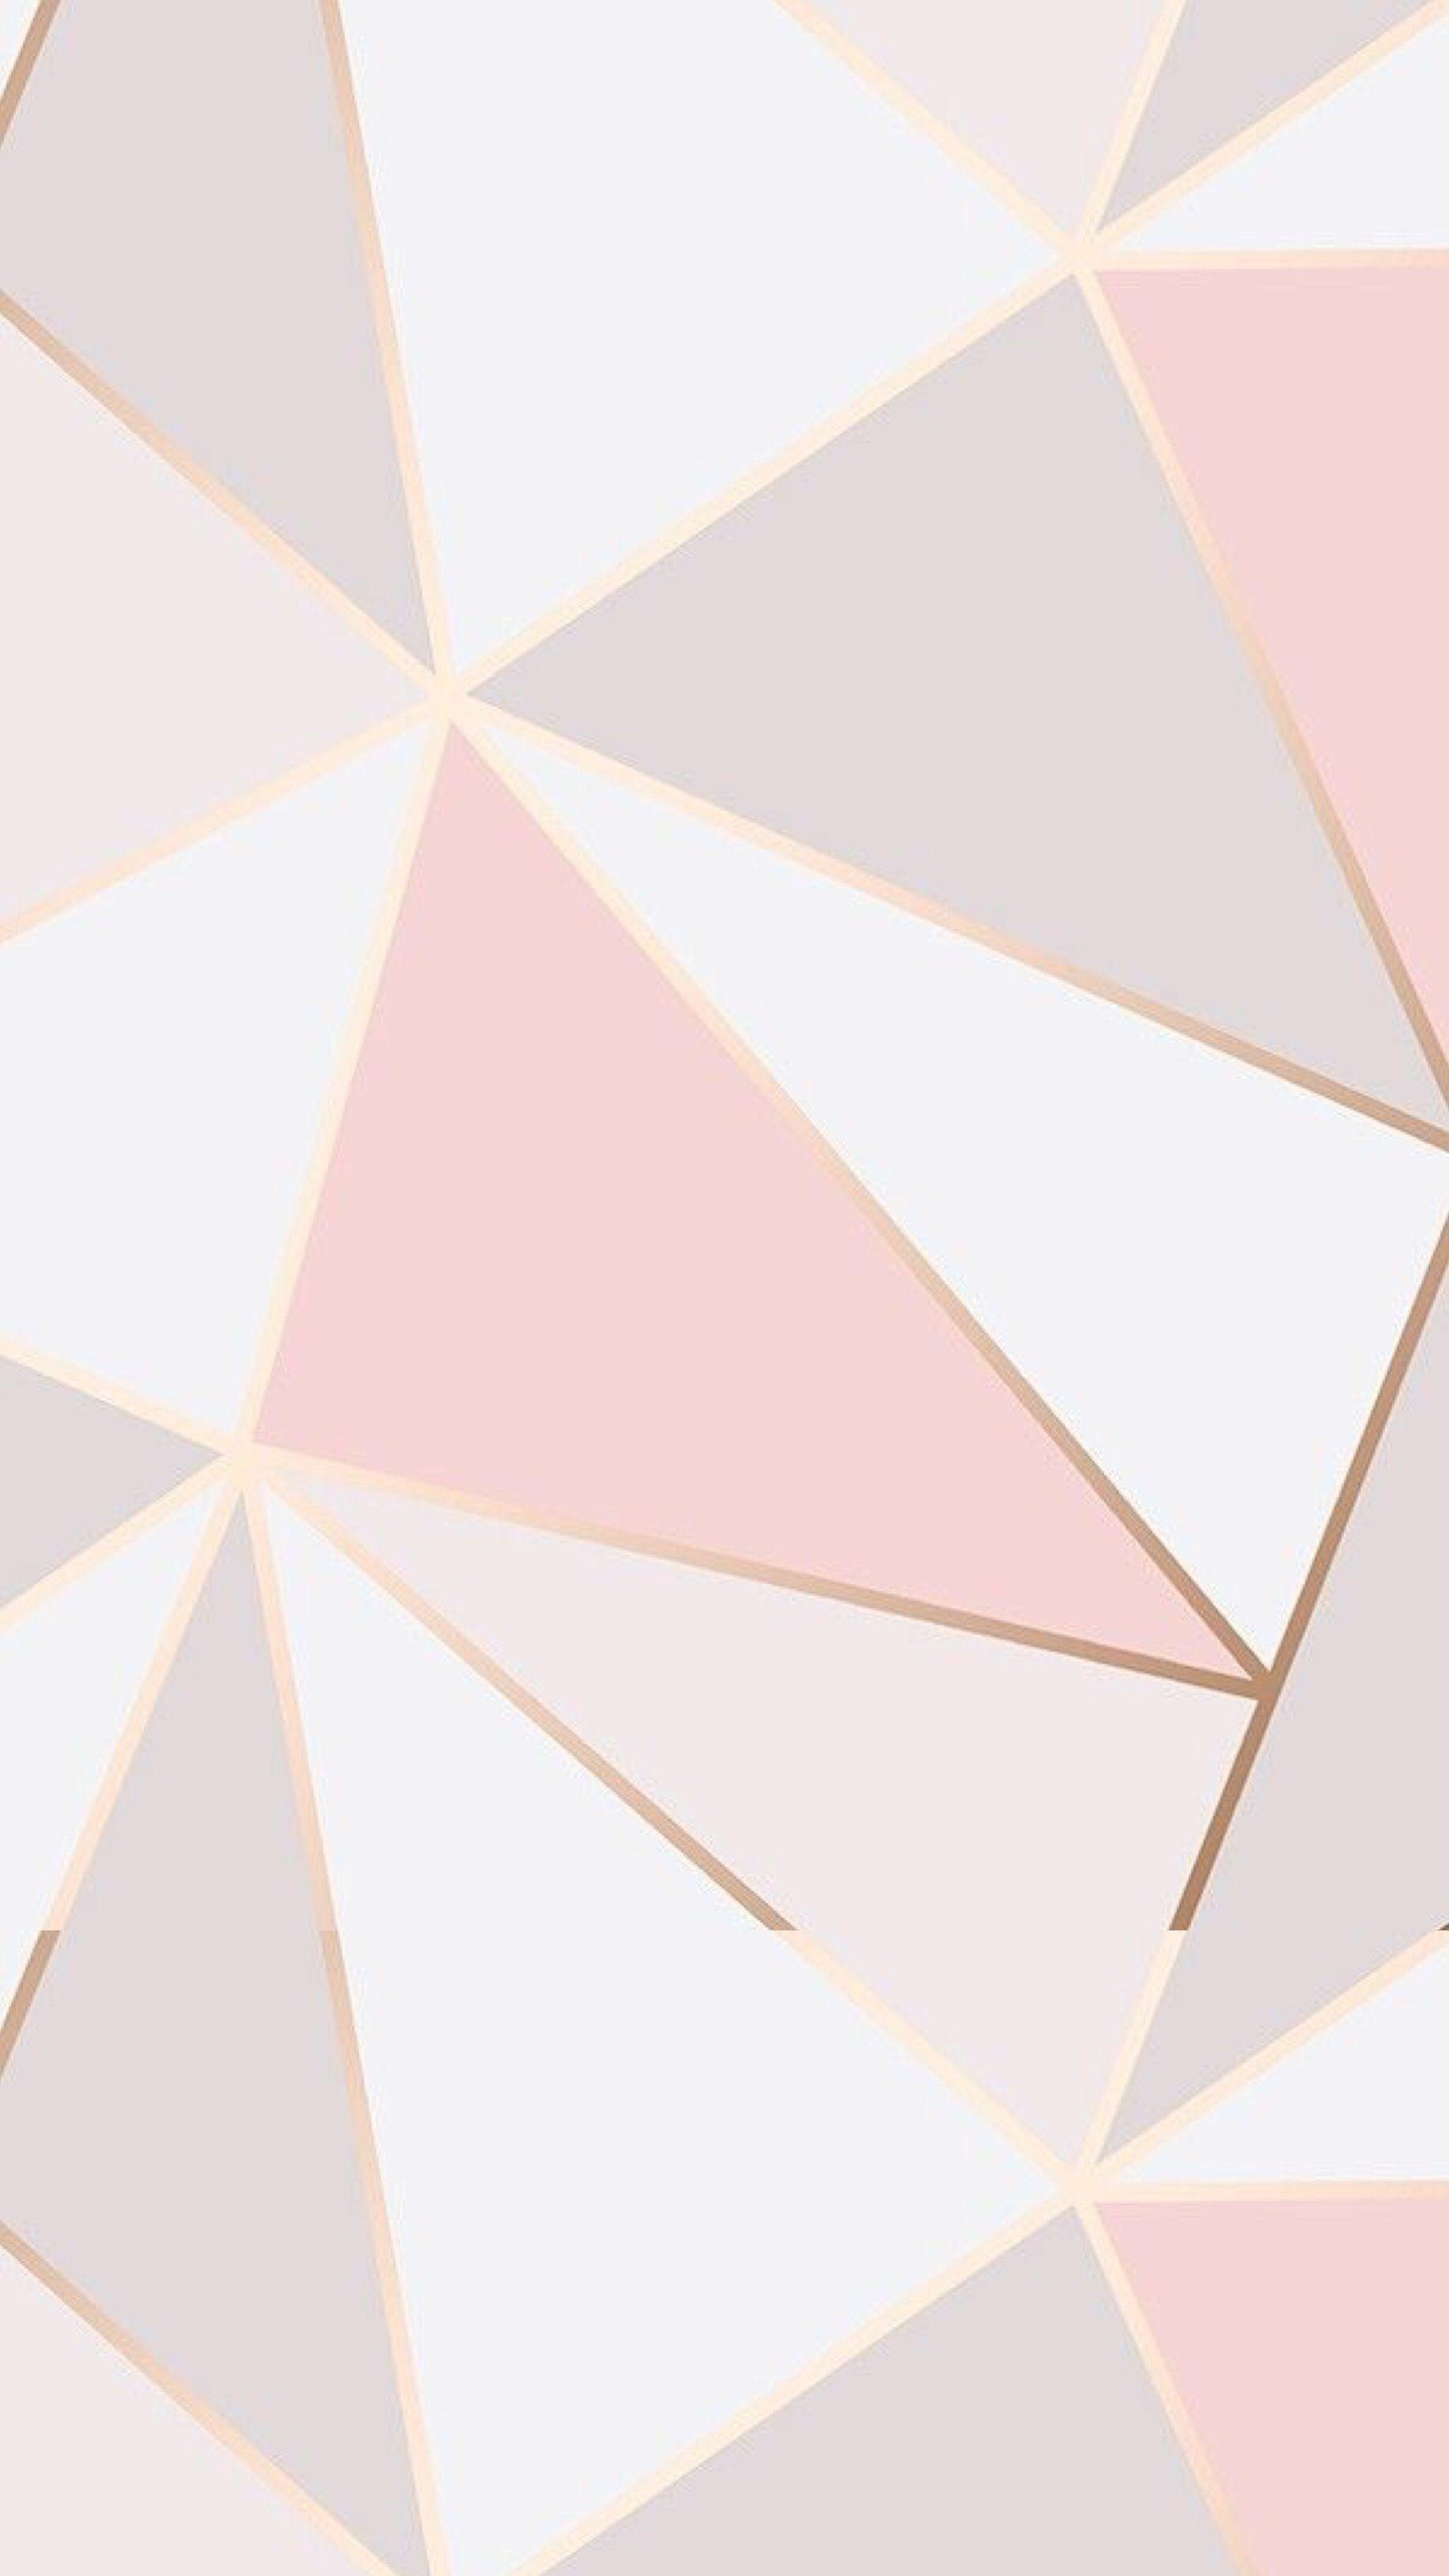 Android Wallpaper: Fun With Patterns - Phandroid